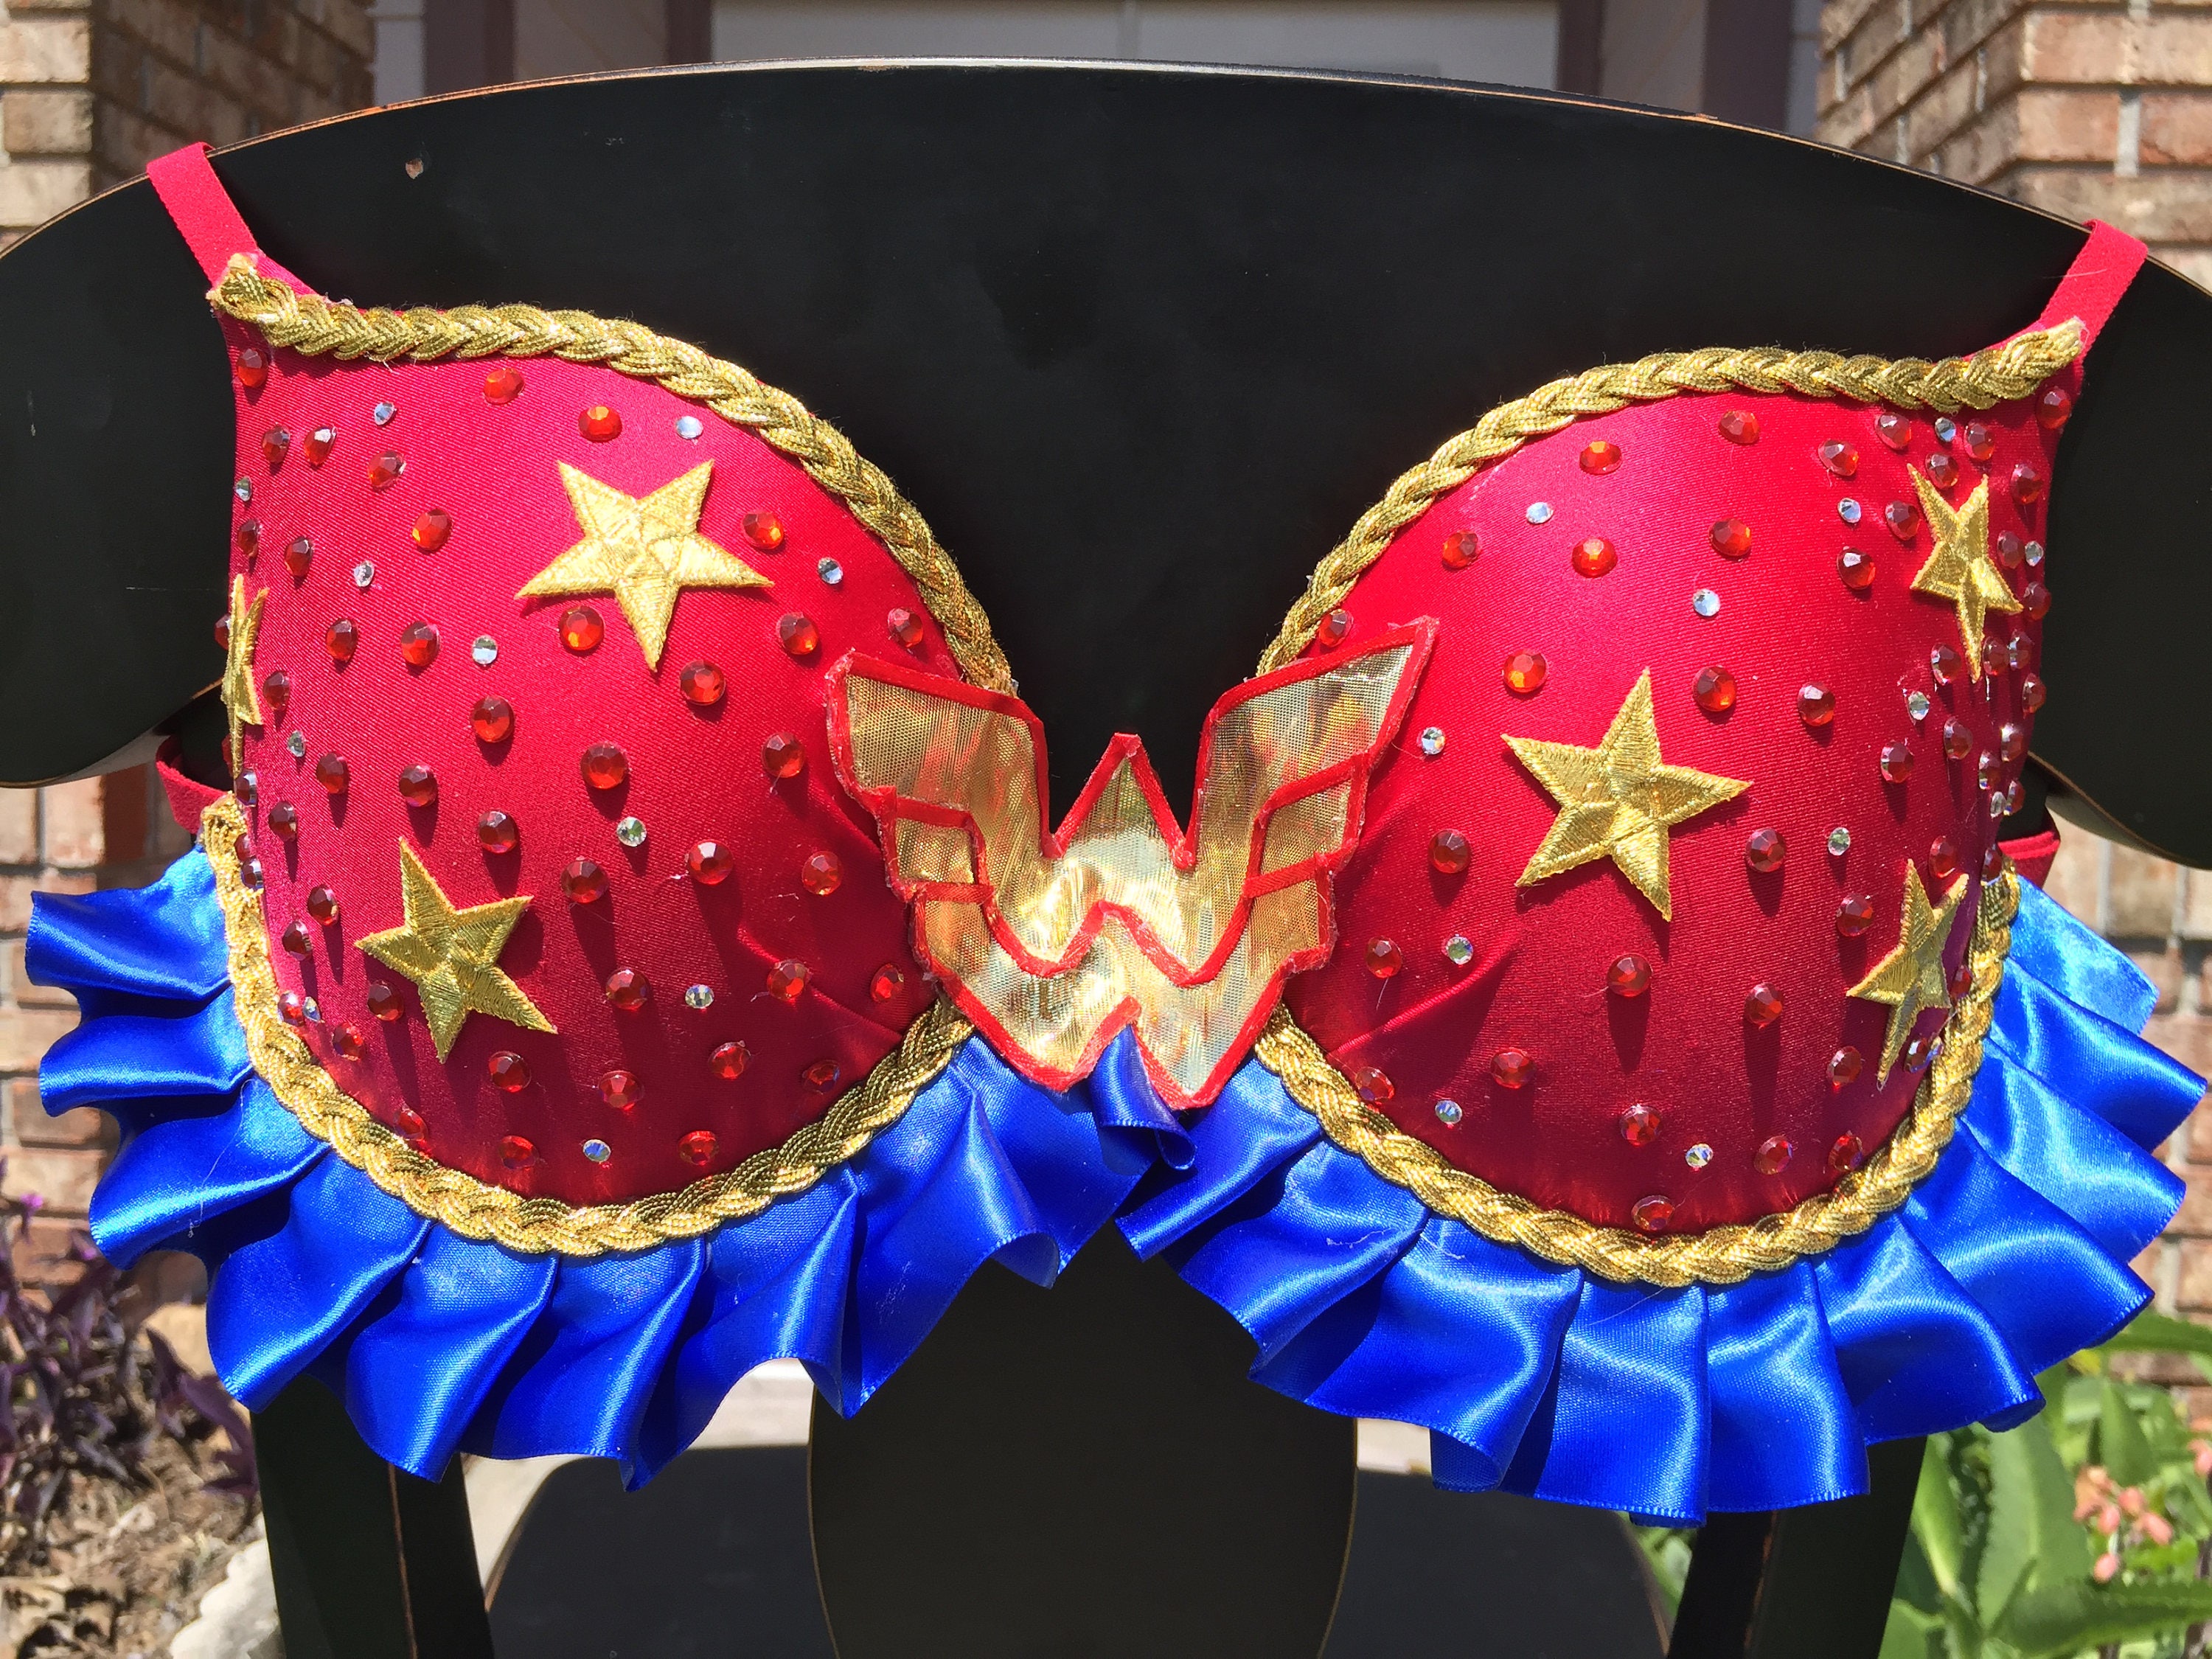 Wonder Woman Golden Lasso Inspired Rave Bra Perfect for Rave Outfit, Edm Bra,  Exotic Dance Bra, Edm Outfit, Rave Wear, EDC Bra, EDC Outfit -  Sweden